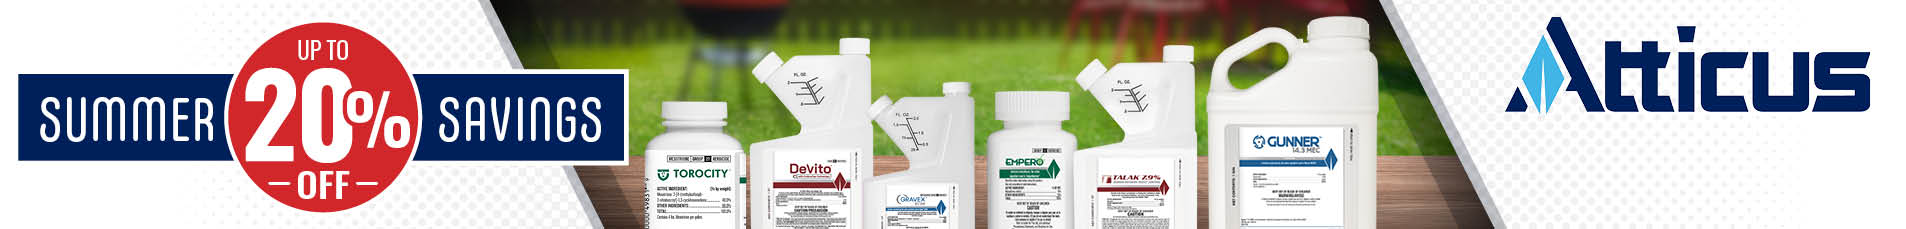 Atticus Summer Savings - Up to 20% Off Weed, Disease and Insect Control